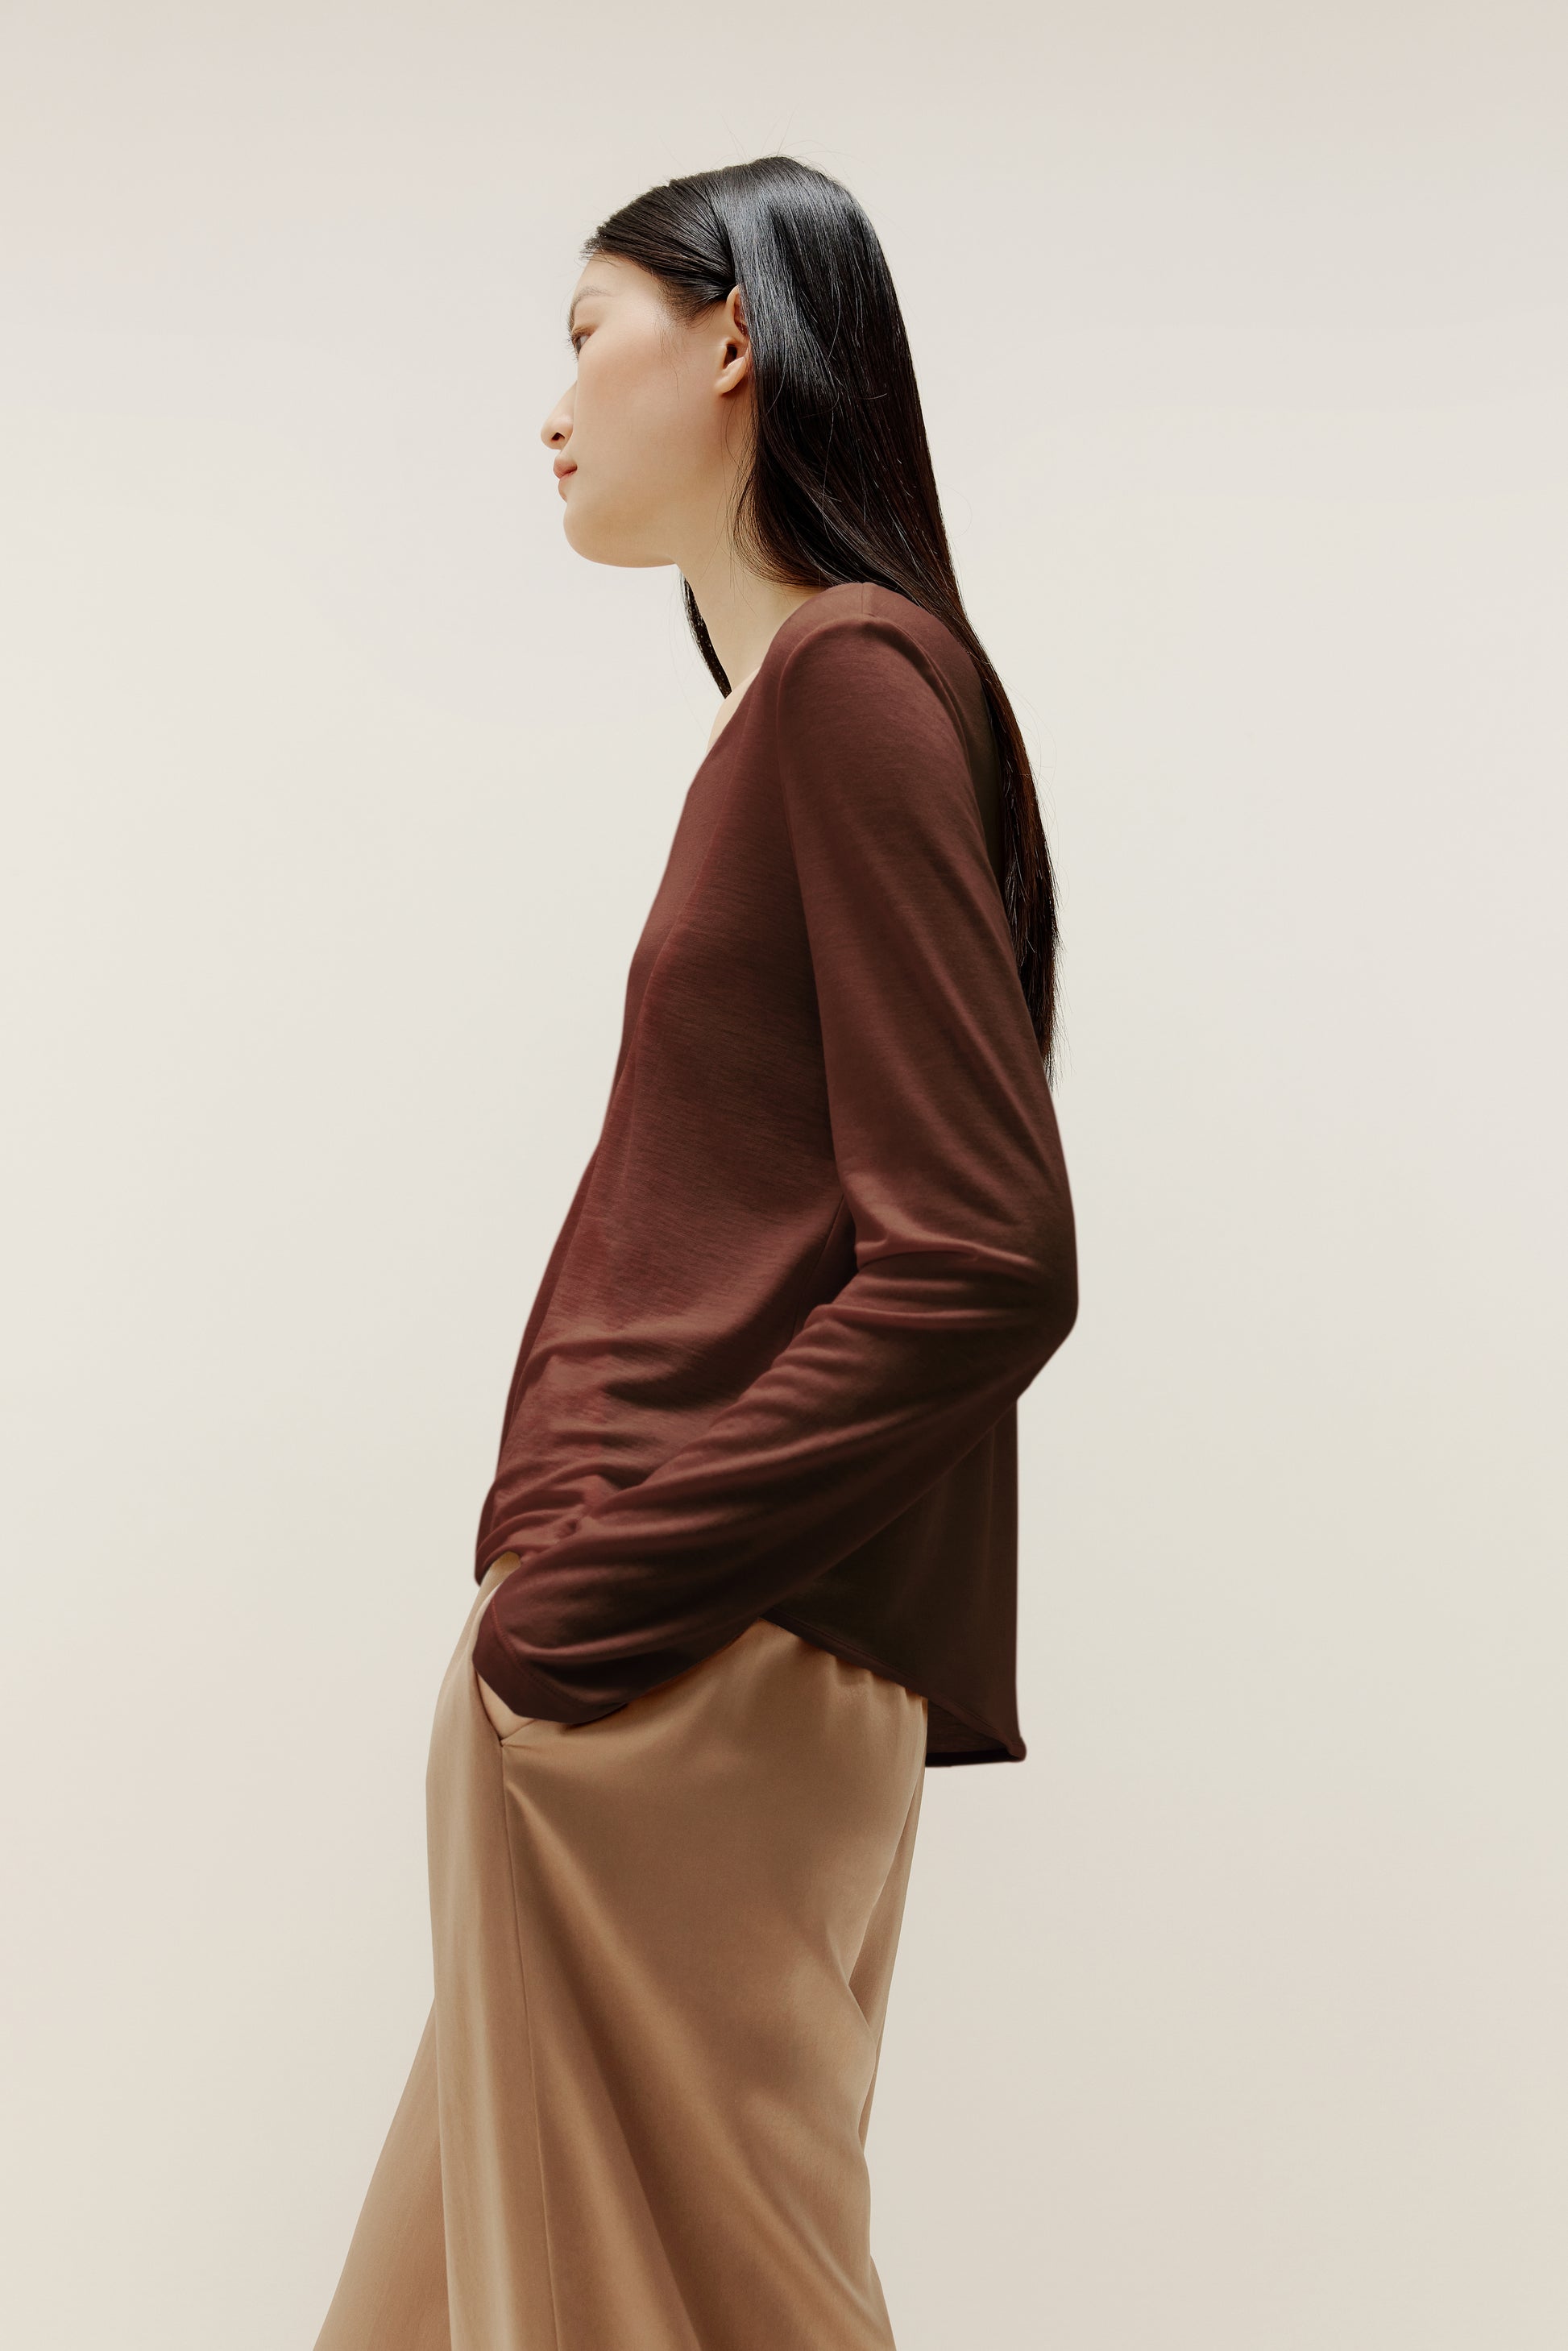 side view of the brown sweater and beige pants.